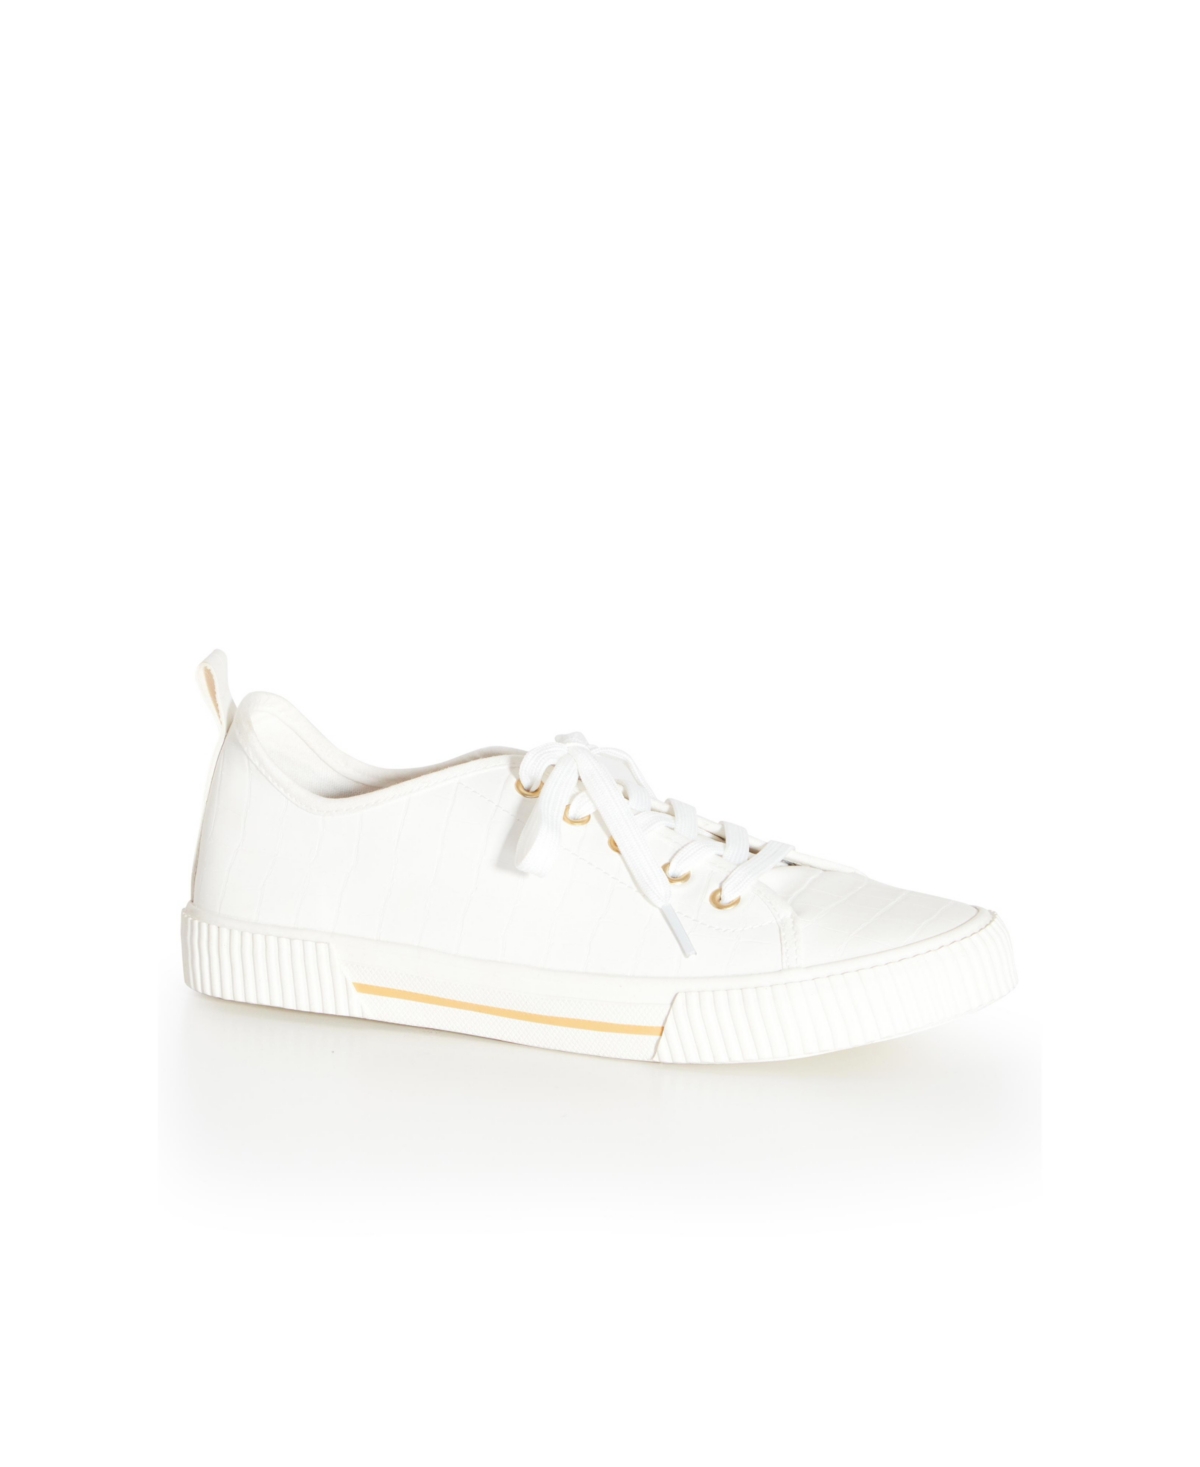 Women's Wide Fit Croc Trainer Sneakers - White